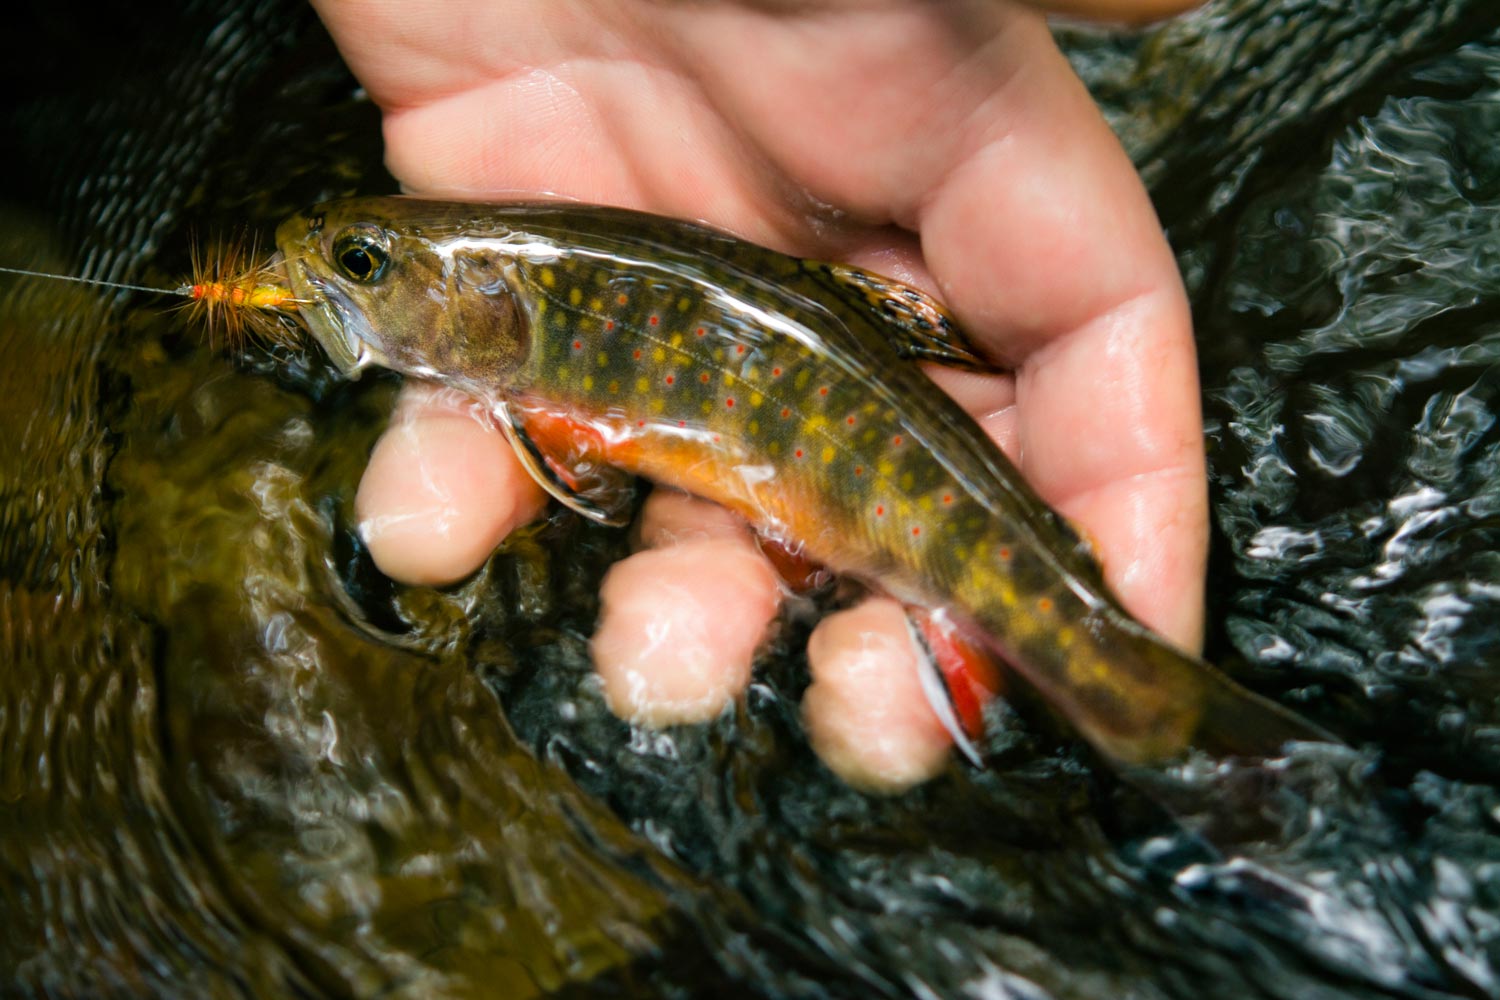 Fishing Creel with Brook Trout Stock Image - Image of lure